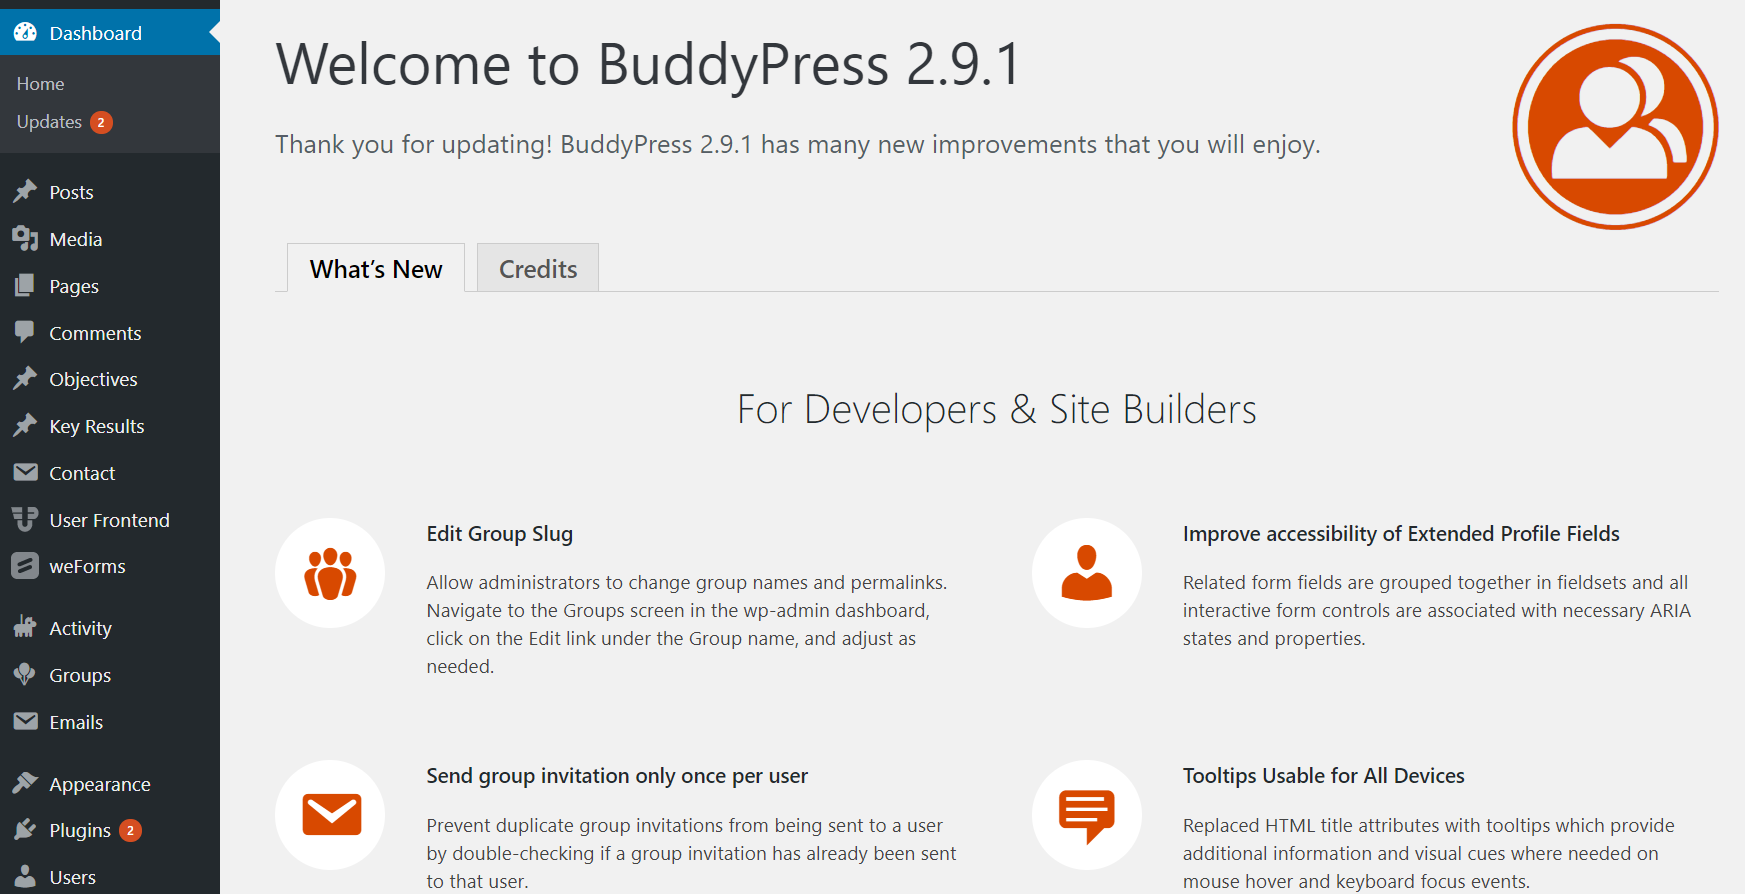 This is a screenshot of welcome message of Buddypress Social Networking Site Using BuddyPress